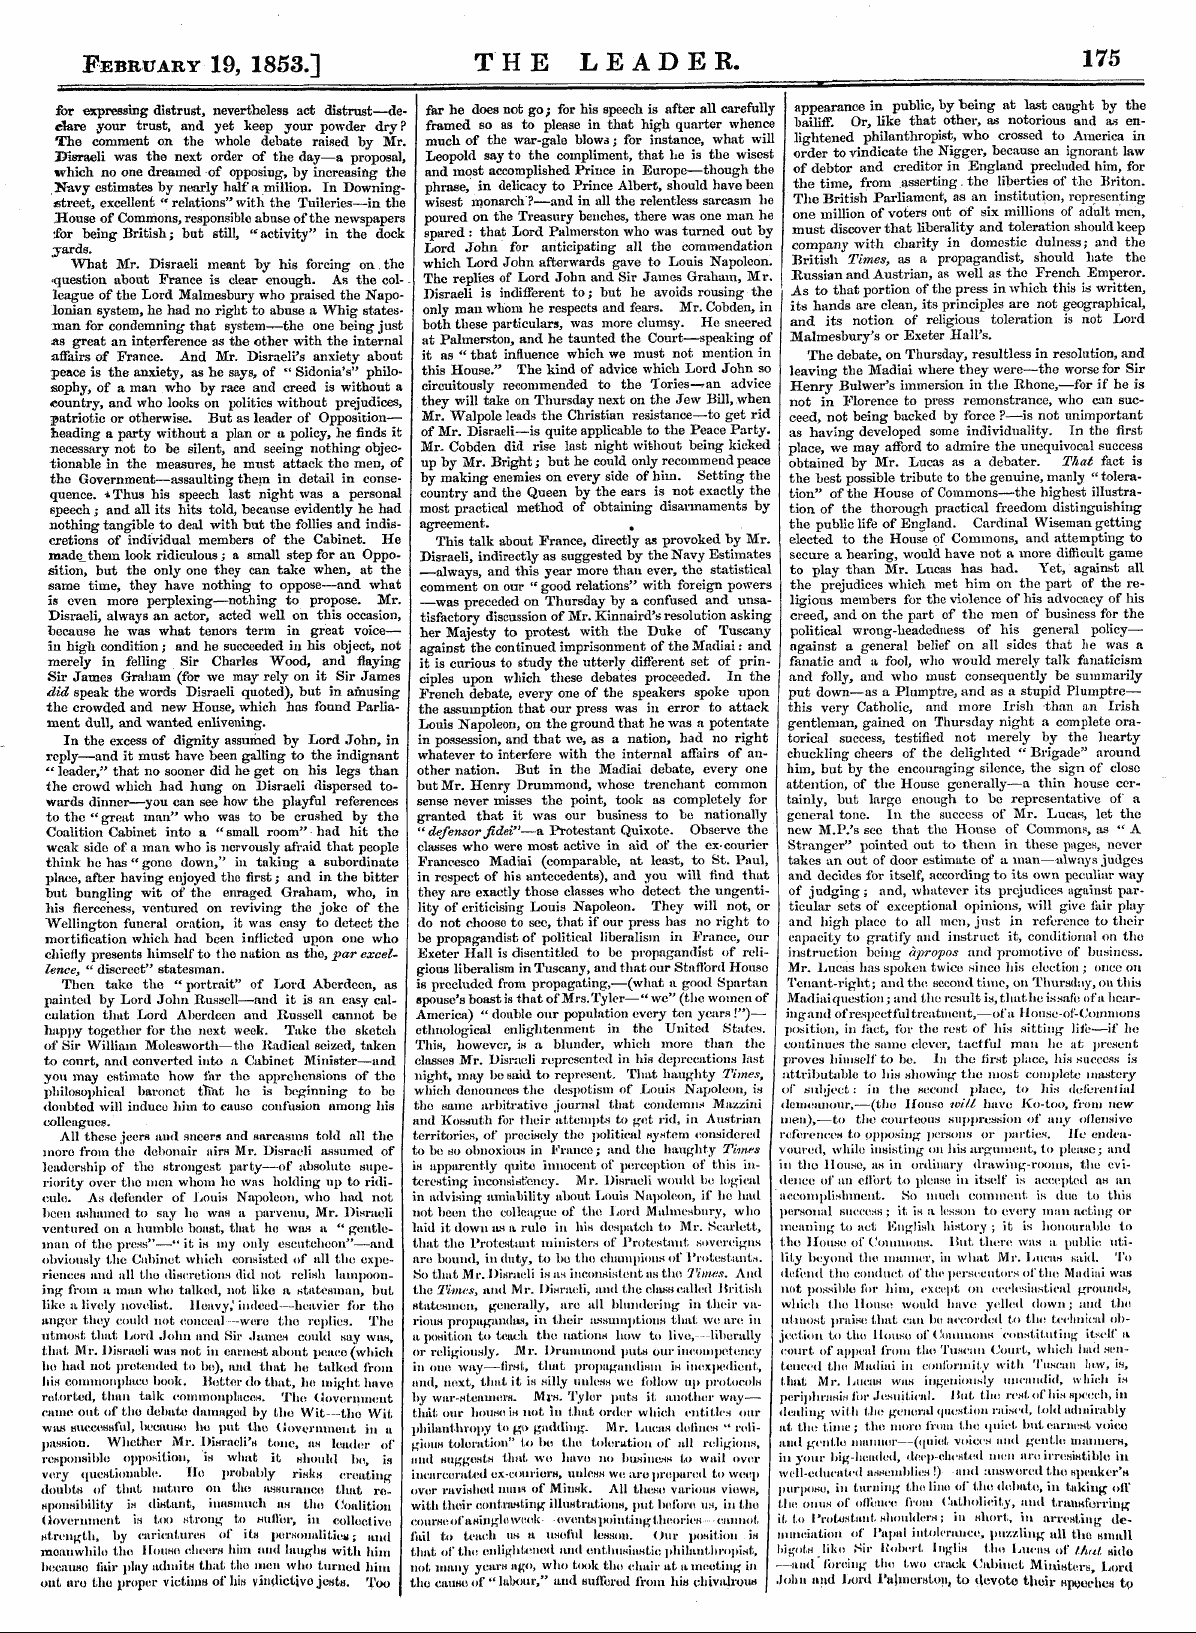 Leader (1850-1860): jS F Y, 1st edition: 7